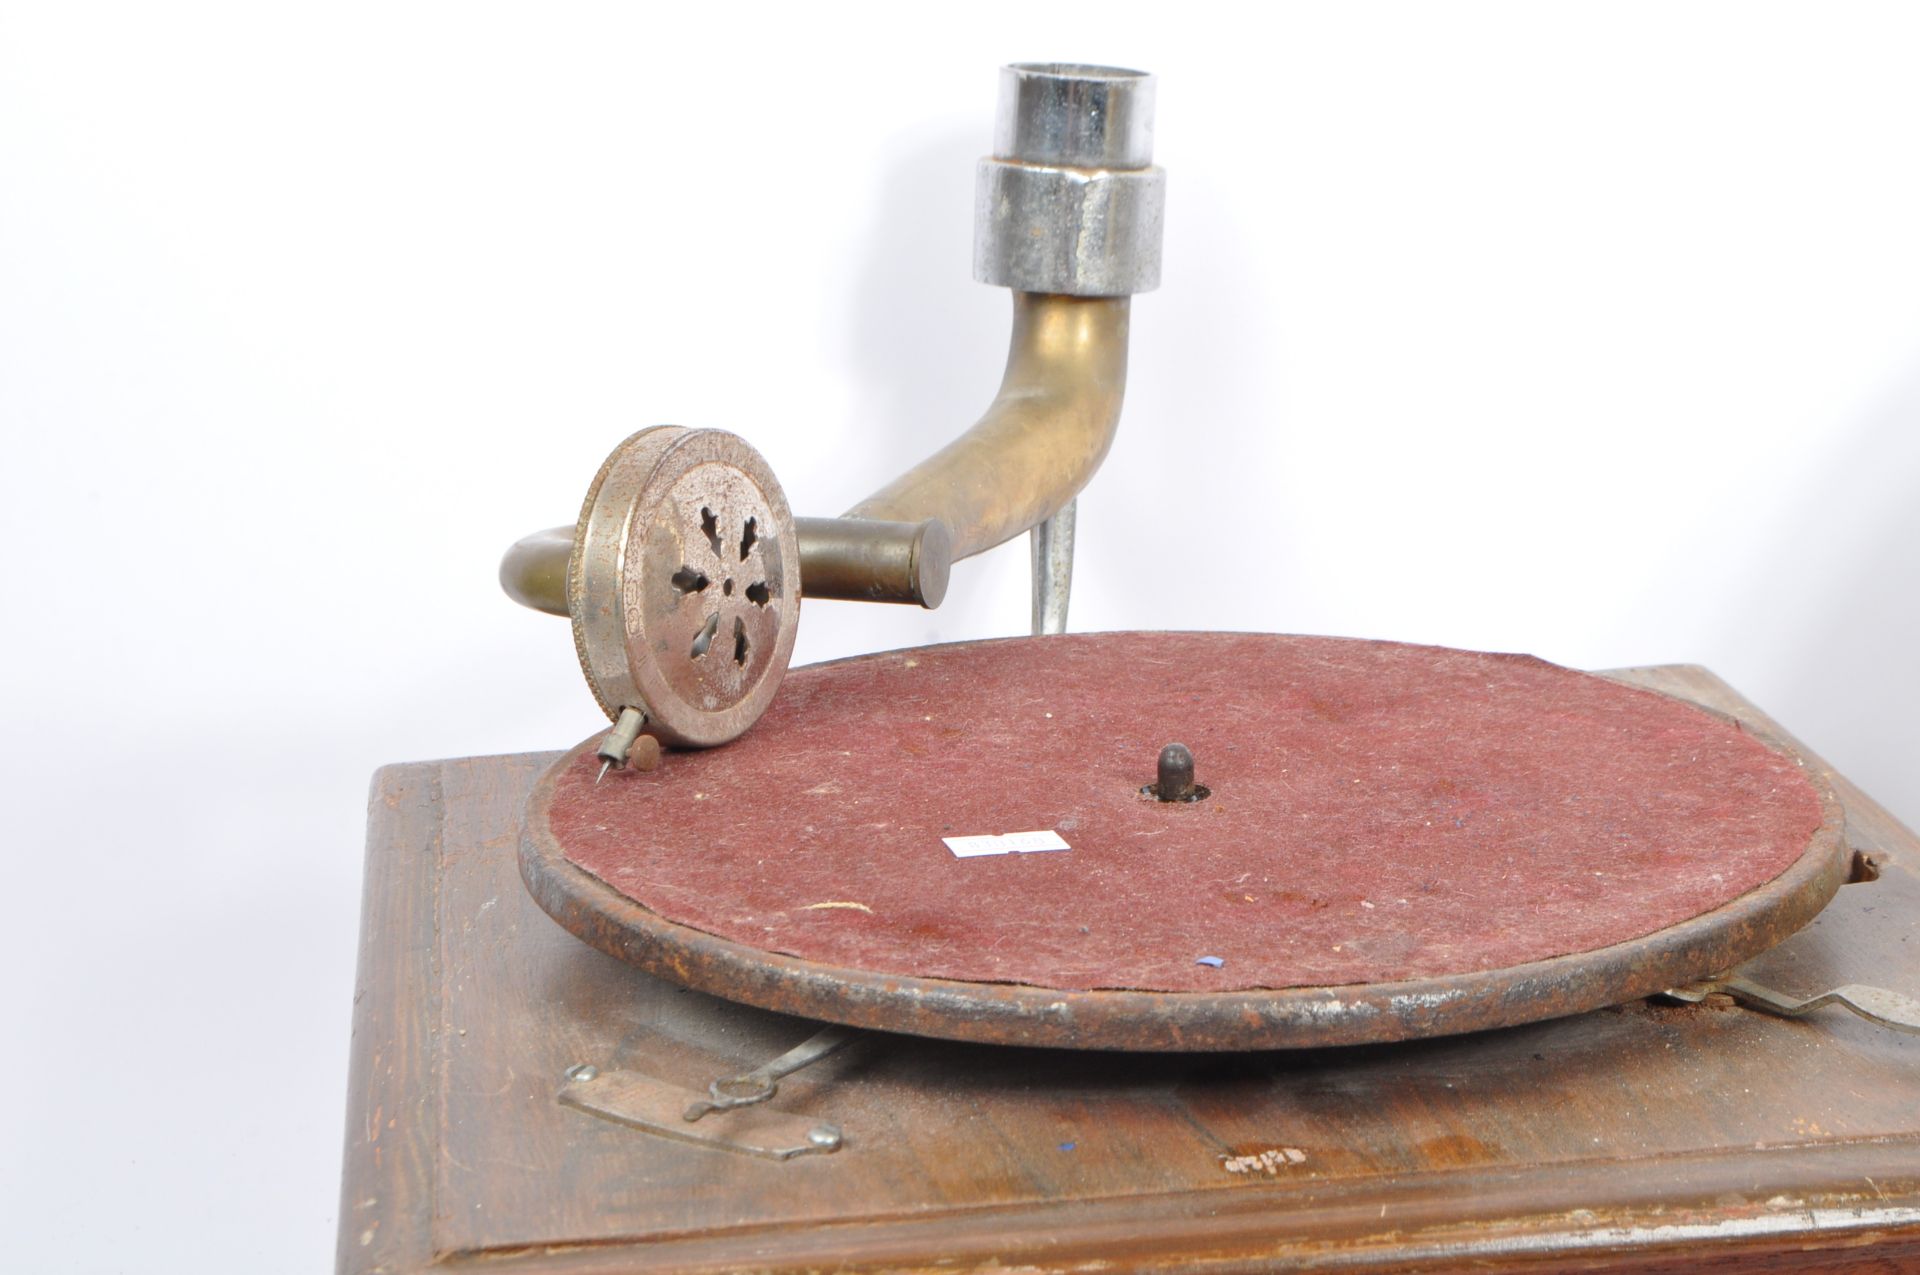 TWO EARLY 20TH CENTURY GRAMOPHONES WITH HORNS - DULCEPHONE - Image 3 of 11